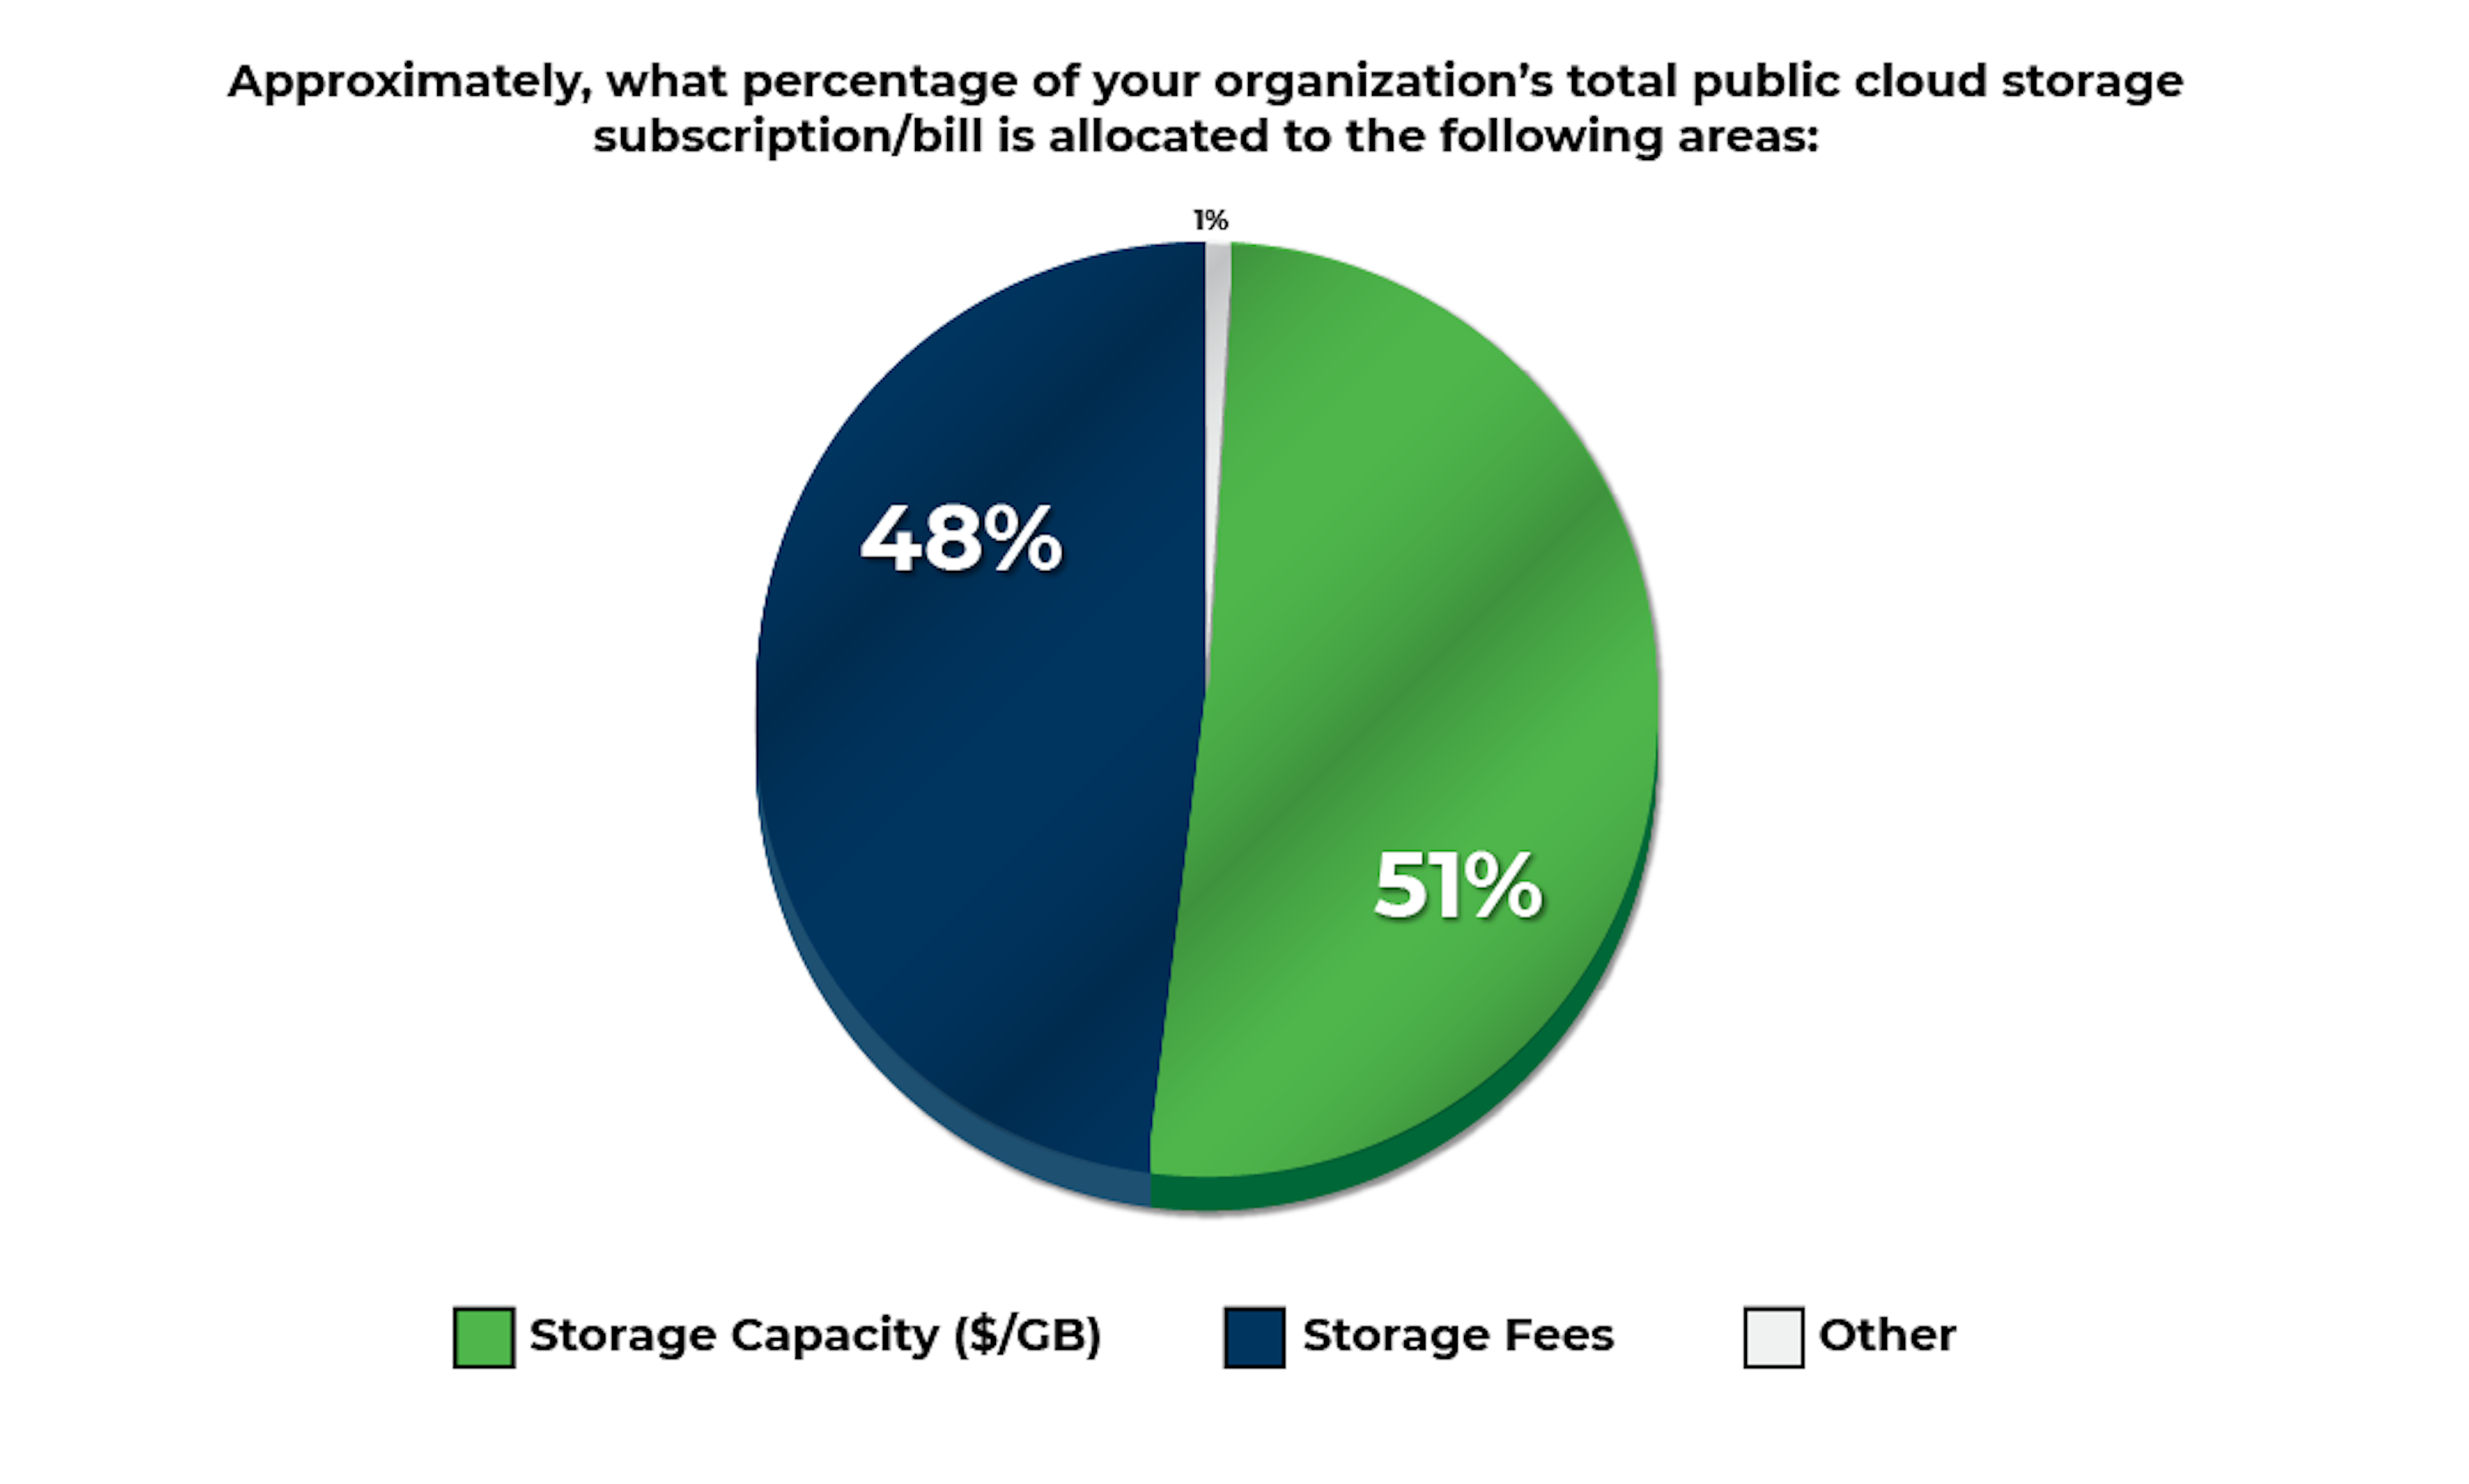 approximately what percentage of your organizations total public cloud storage subscription/bill is allocated to storage capacity vs storage fees